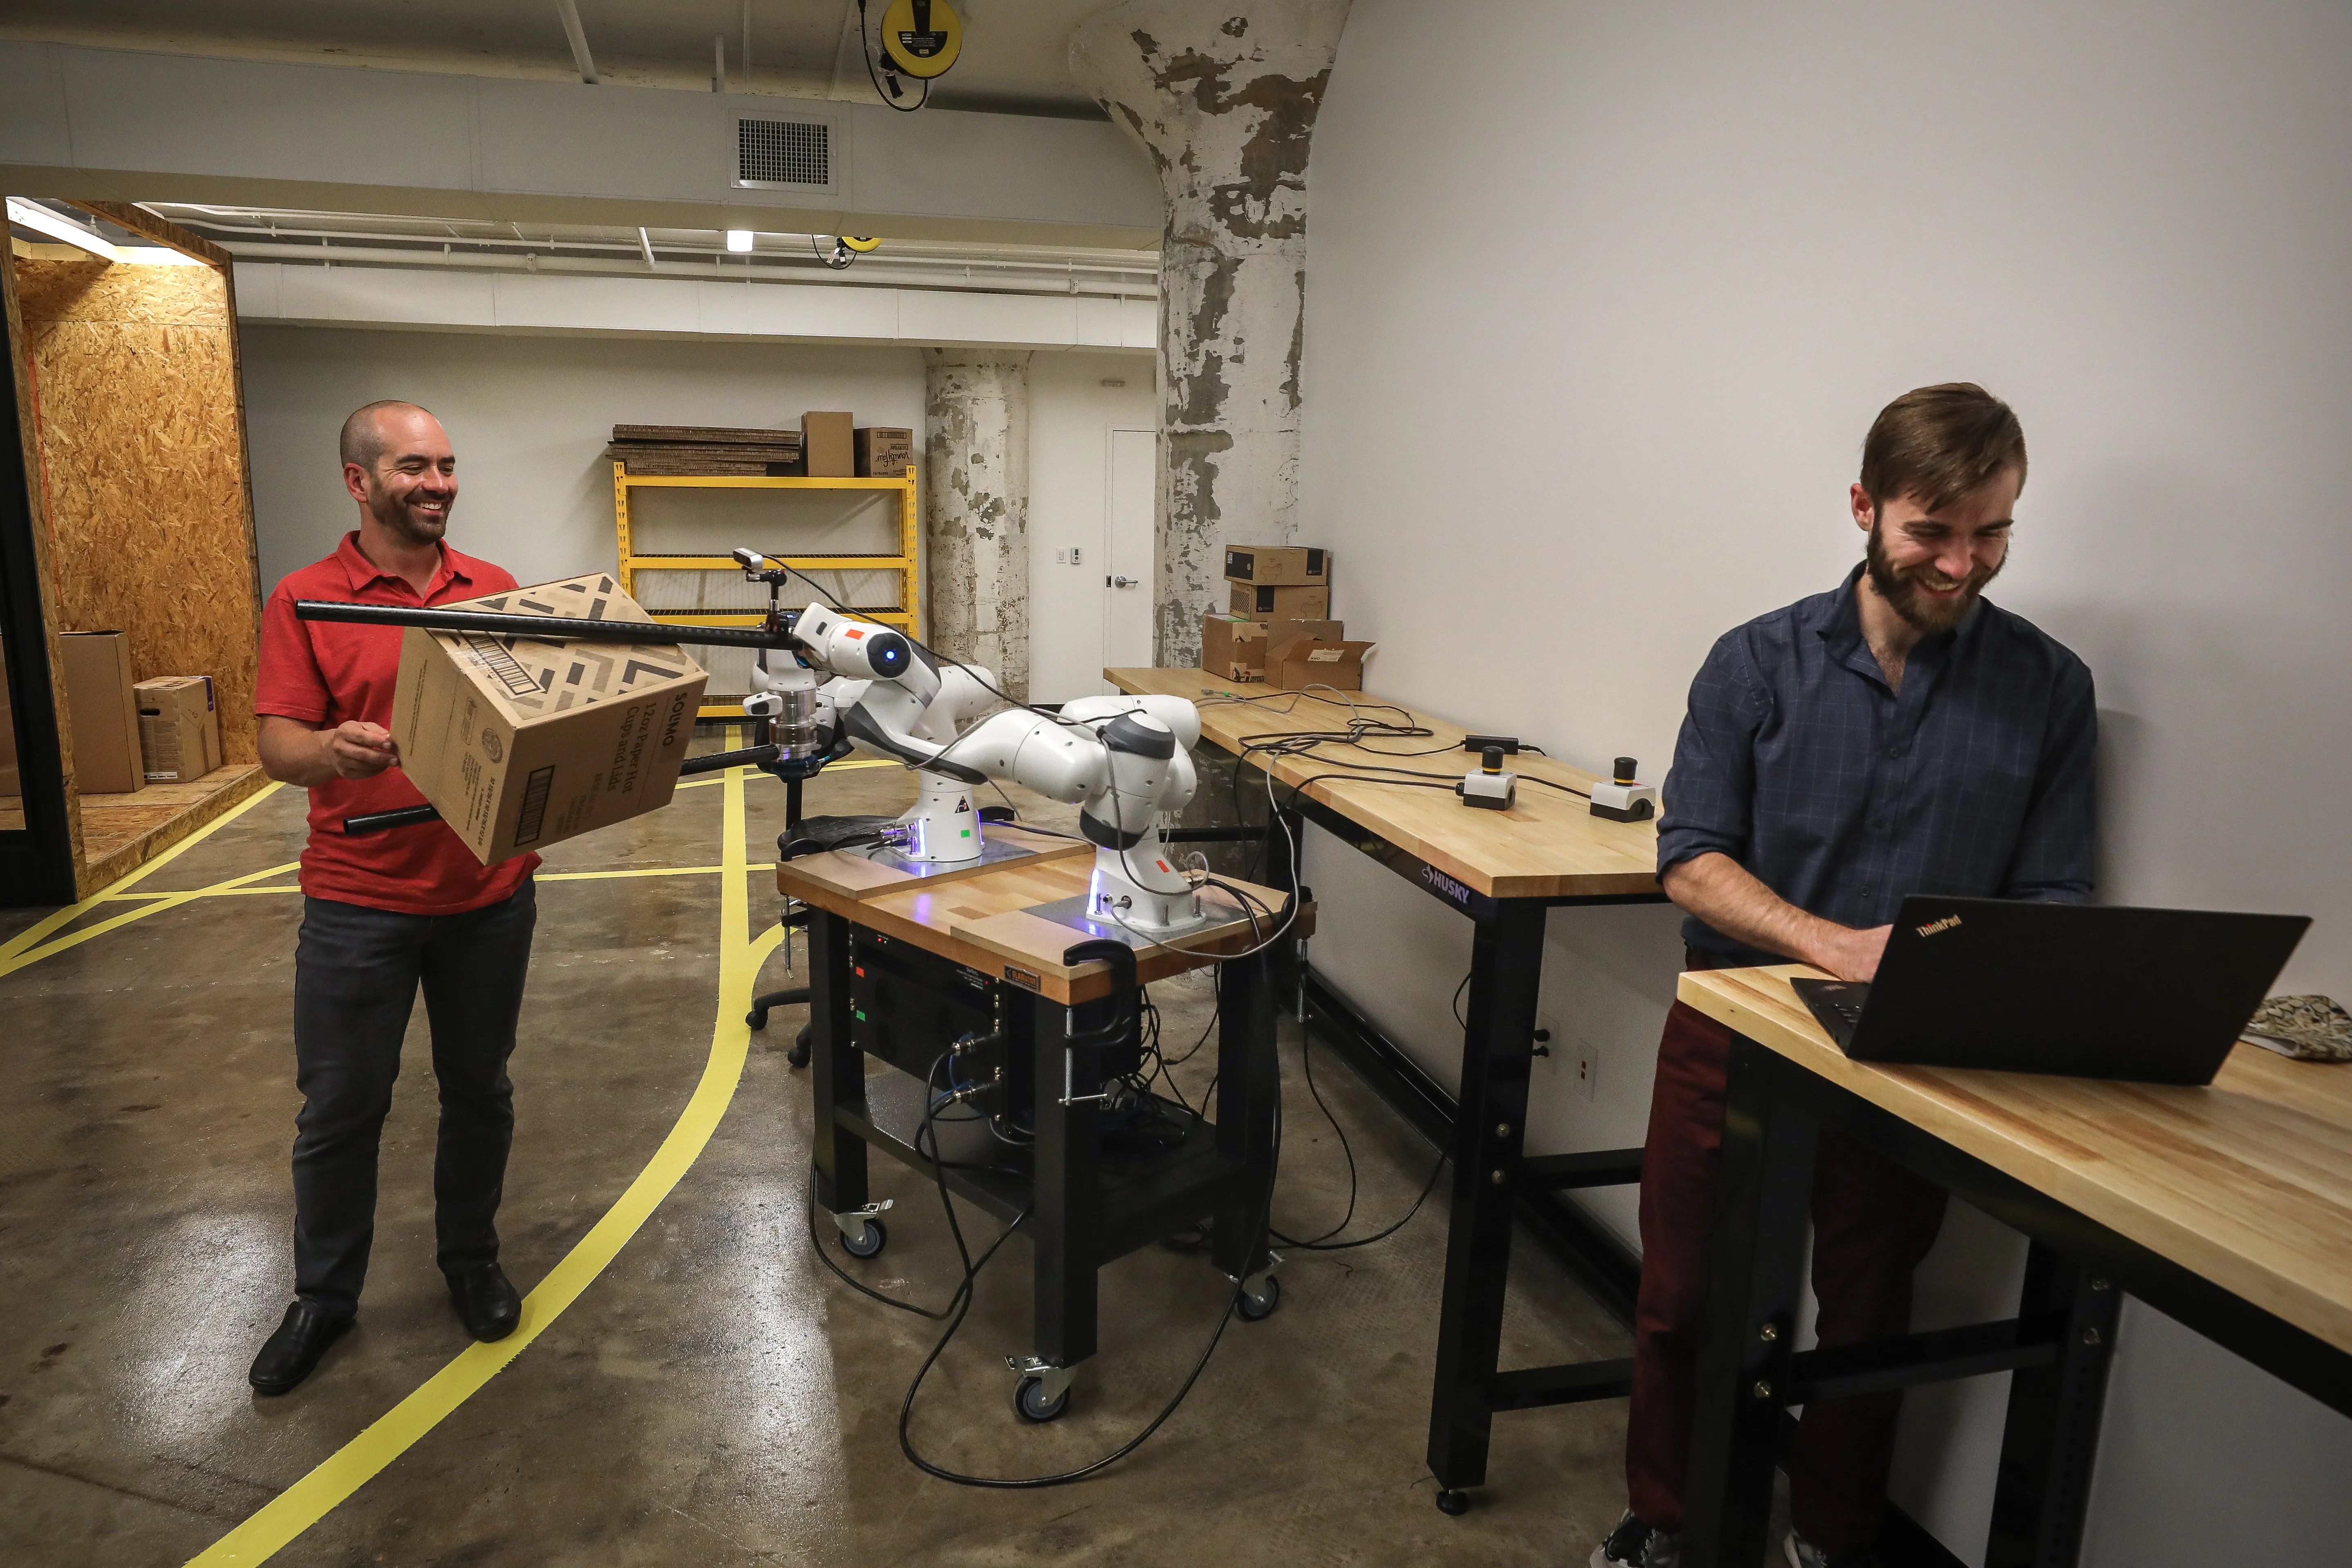 Dextrous Robotics co-founders Evan Drumwright (left) and Sam Zapolsky (right) work inside the company's research lab at Crosstown Concourse in Memphis. It's developing a robot that can handle heavy packages at high speeds.